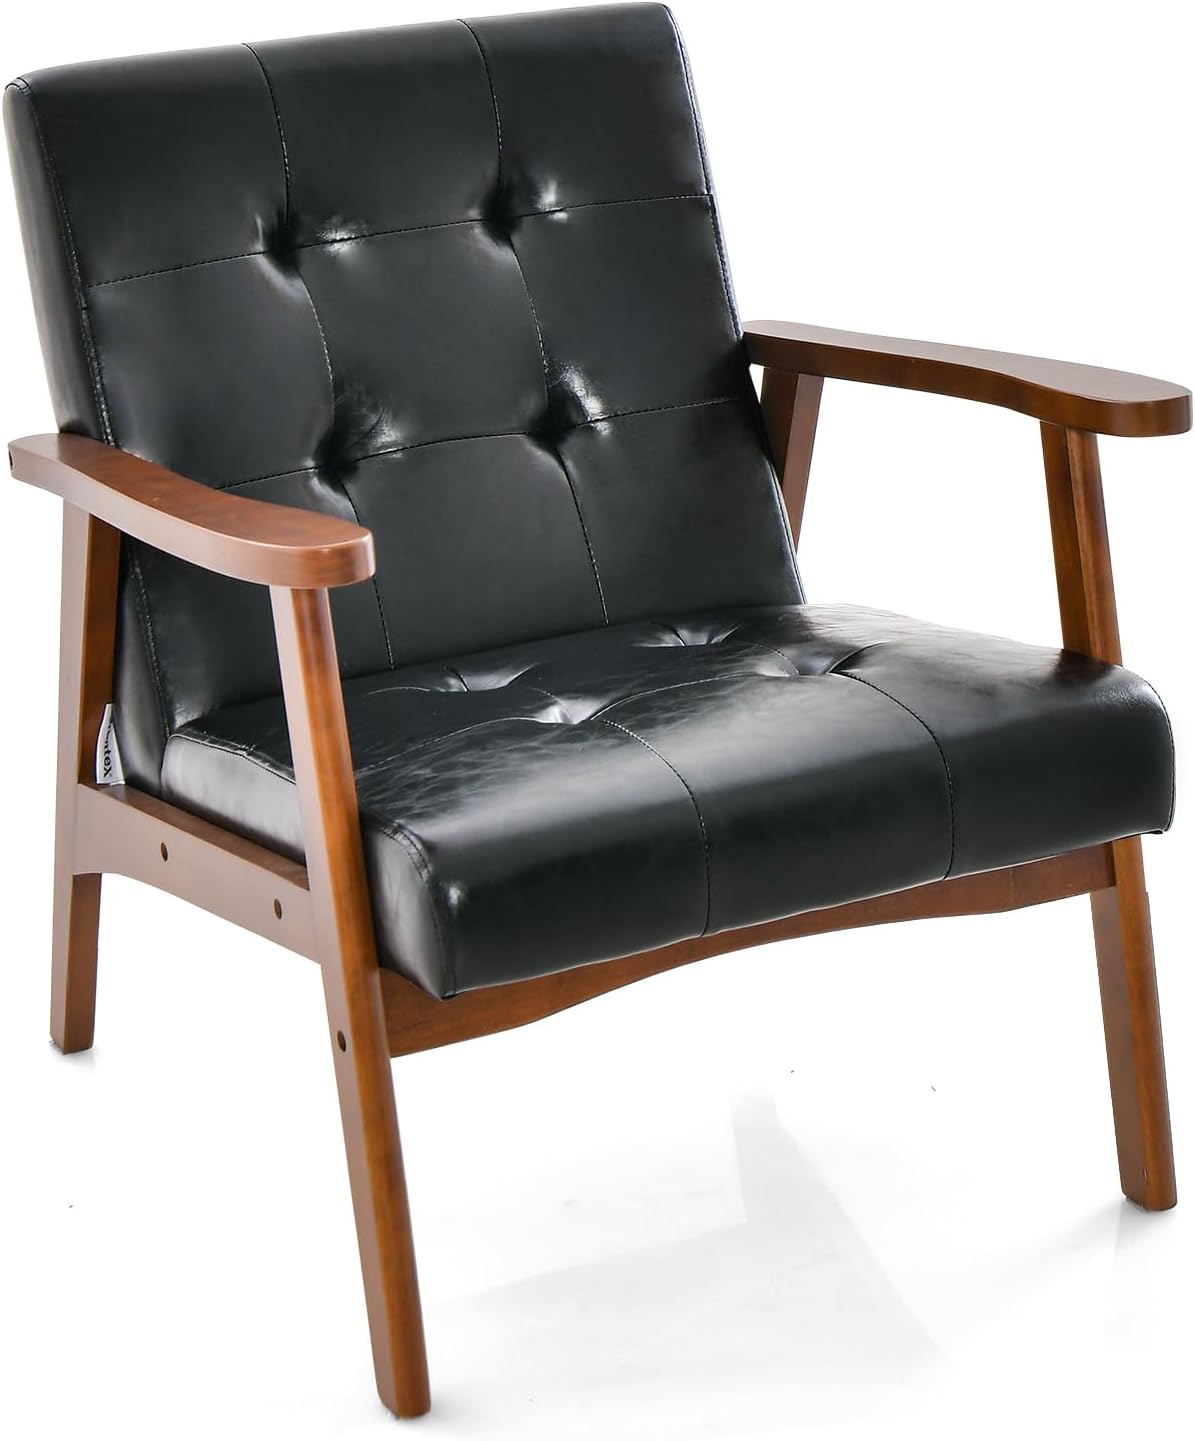 Giantex Mid Century Modern Accent Chair, Upholstered Tufted Armchair with Solid Rubber Wood Frame